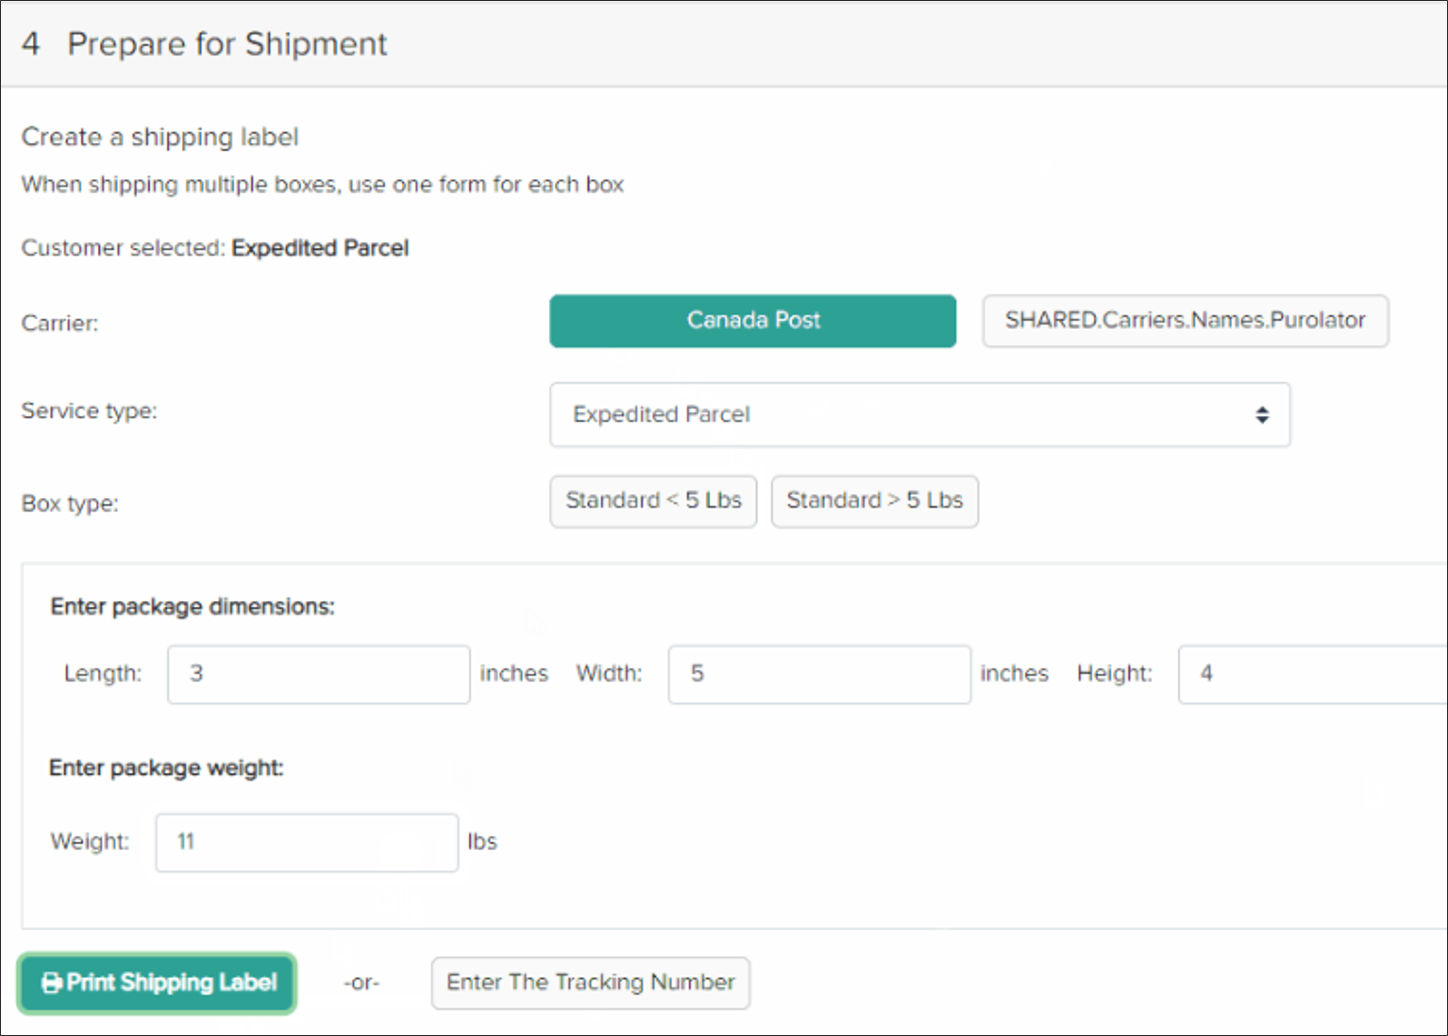 Example of the Prepare for Shipment step